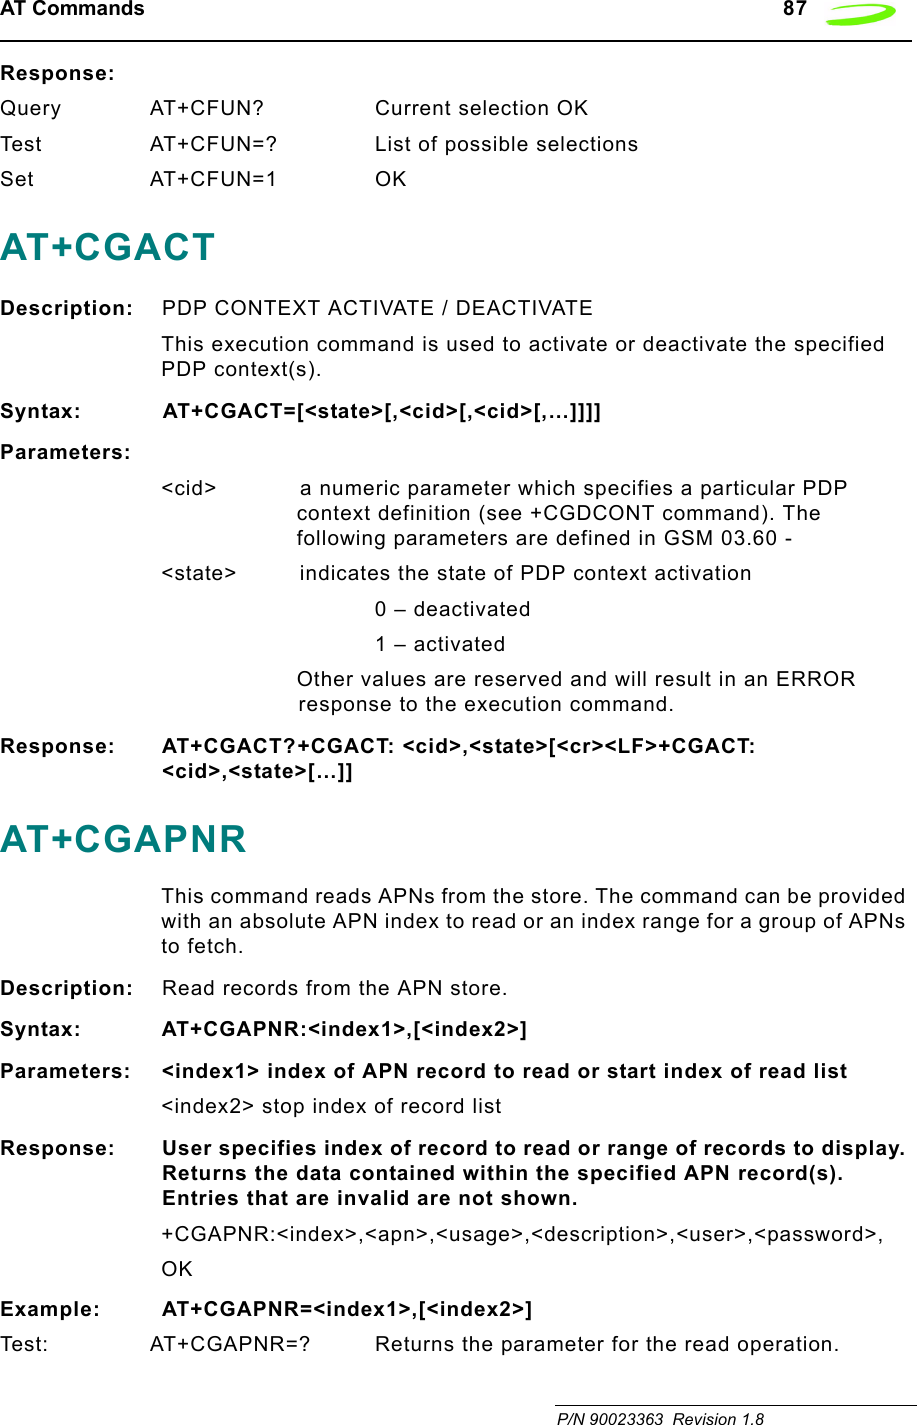 AT Commands   87 P/N 90023363  Revision 1.8 Response:Query AT+CFUN? Current selection OKTest AT+CFUN=? List of possible selectionsSet AT+CFUN=1 OKAT+CGACTDescription: PDP CONTEXT ACTIVATE / DEACTIVATEThis execution command is used to activate or deactivate the specified PDP context(s).Syntax: AT+CGACT=[&lt;state&gt;[,&lt;cid&gt;[,&lt;cid&gt;[,…]]]]Parameters:&lt;cid&gt; a numeric parameter which specifies a particular PDP context definition (see +CGDCONT command). The following parameters are defined in GSM 03.60 -&lt;state&gt;  indicates the state of PDP context activation0 – deactivated1 – activatedOther values are reserved and will result in an ERROR response to the execution command.Response: AT+CGACT?+CGACT: &lt;cid&gt;,&lt;state&gt;[&lt;cr&gt;&lt;LF&gt;+CGACT: &lt;cid&gt;,&lt;state&gt;[…]]AT+CGAPNRThis command reads APNs from the store. The command can be provided with an absolute APN index to read or an index range for a group of APNs to fetch.Description: Read records from the APN store.Syntax: AT+CGAPNR:&lt;index1&gt;,[&lt;index2&gt;]Parameters: &lt;index1&gt; index of APN record to read or start index of read list&lt;index2&gt; stop index of record listResponse: User specifies index of record to read or range of records to display. Returns the data contained within the specified APN record(s). Entries that are invalid are not shown.+CGAPNR:&lt;index&gt;,&lt;apn&gt;,&lt;usage&gt;,&lt;description&gt;,&lt;user&gt;,&lt;password&gt;,OKExample: AT+CGAPNR=&lt;index1&gt;,[&lt;index2&gt;]Test: AT+CGAPNR=? Returns the parameter for the read operation.